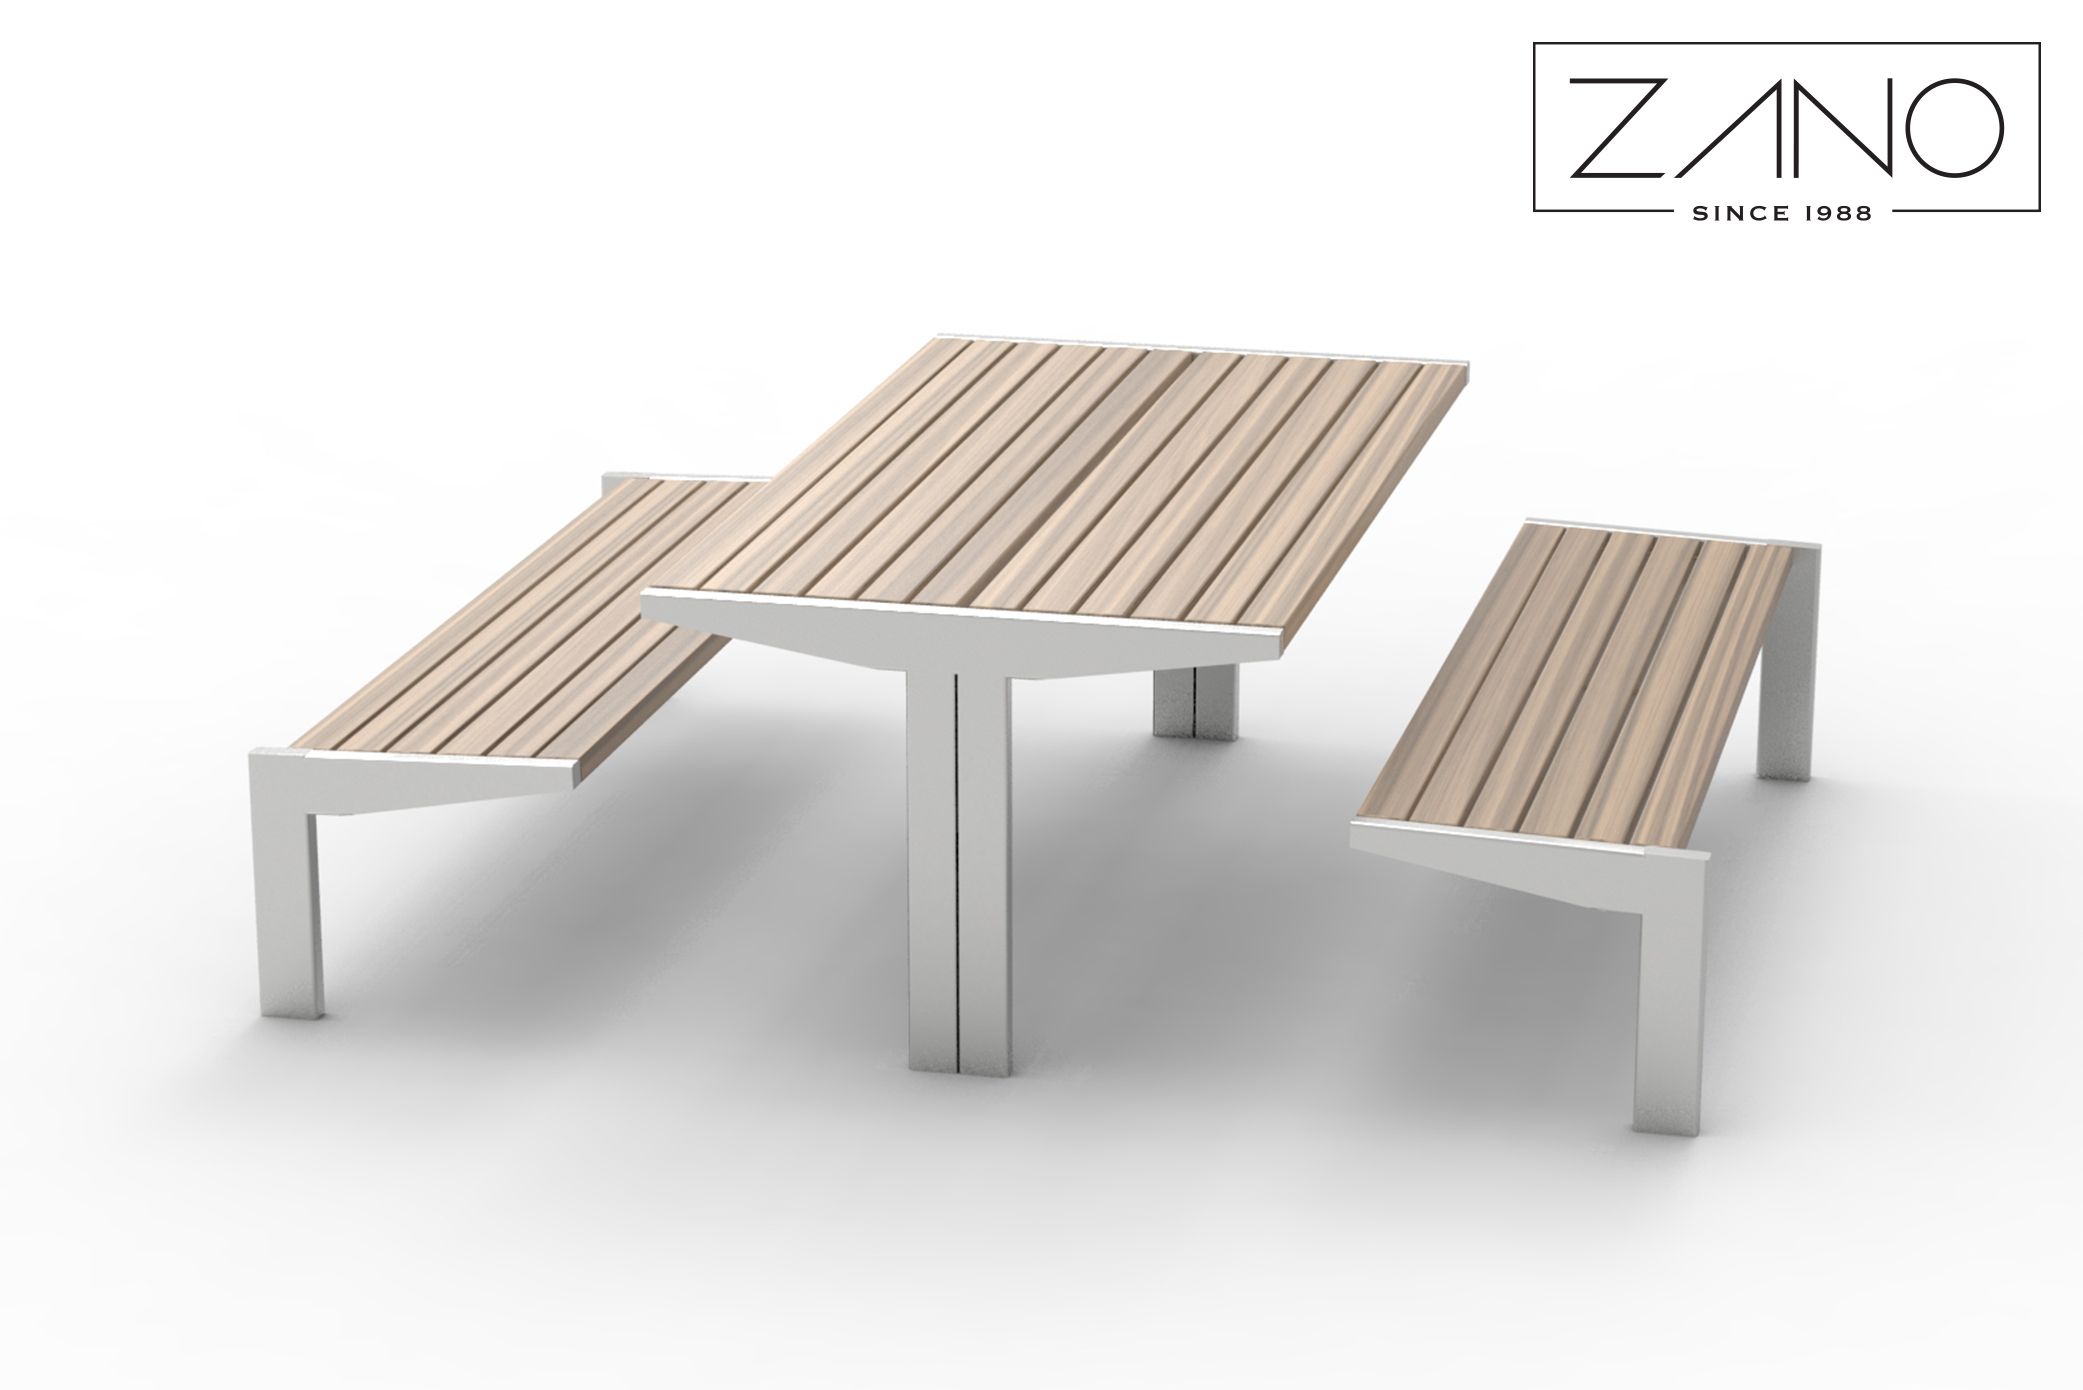 Stainless steel table with benches for cities and parks